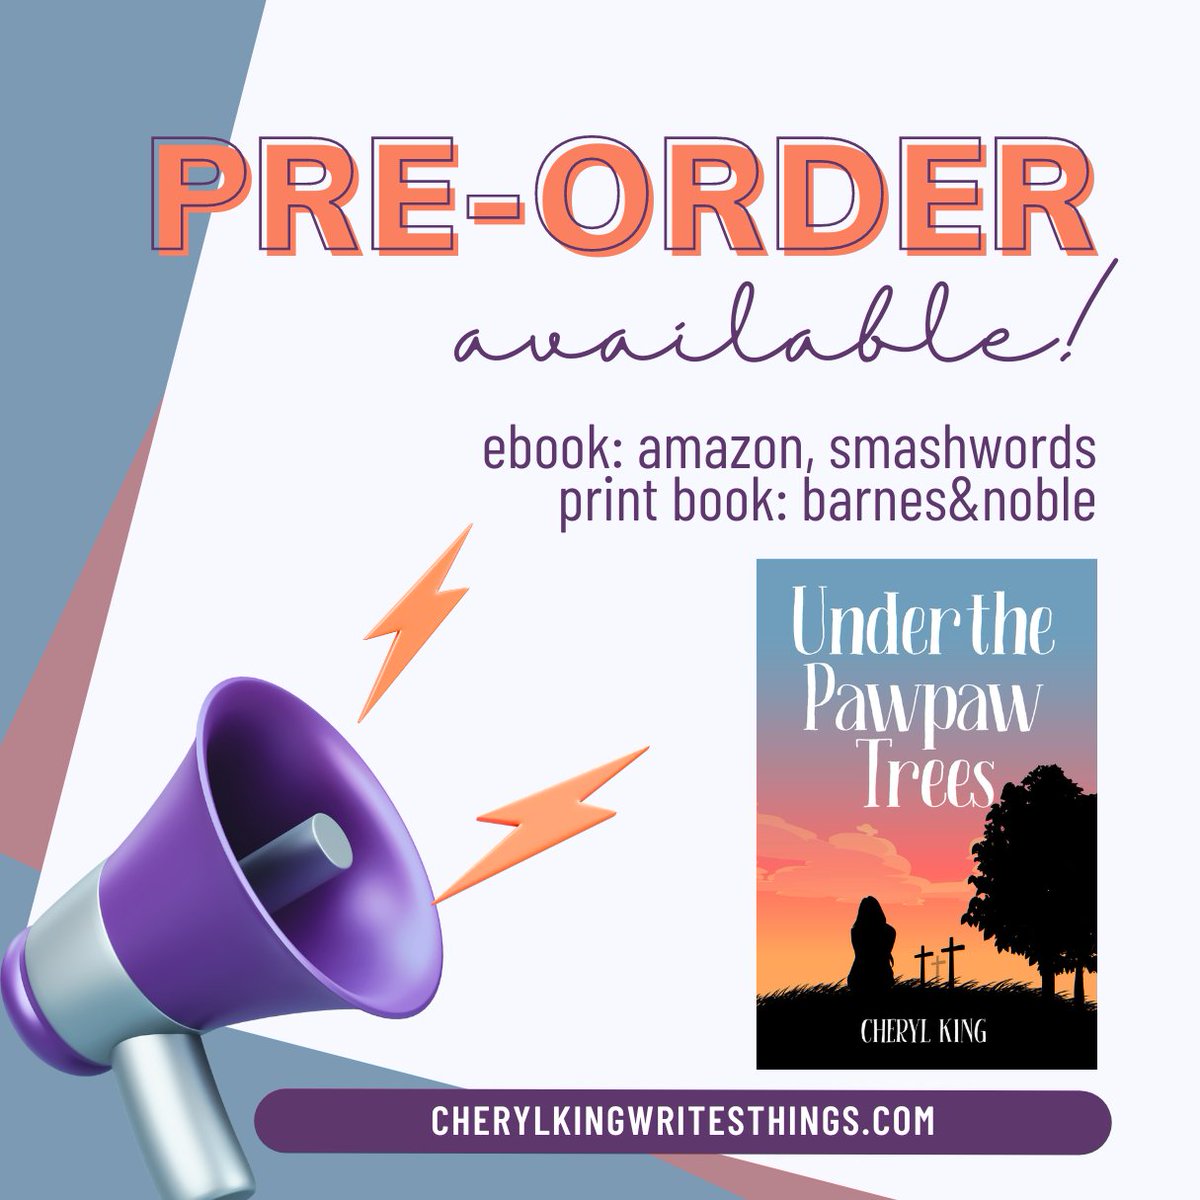 Hey, do you like books? My new one is available for pre-order now! #writingcommunity #readingcommunity #indieauthors #books #teenfiction #historicalfiction